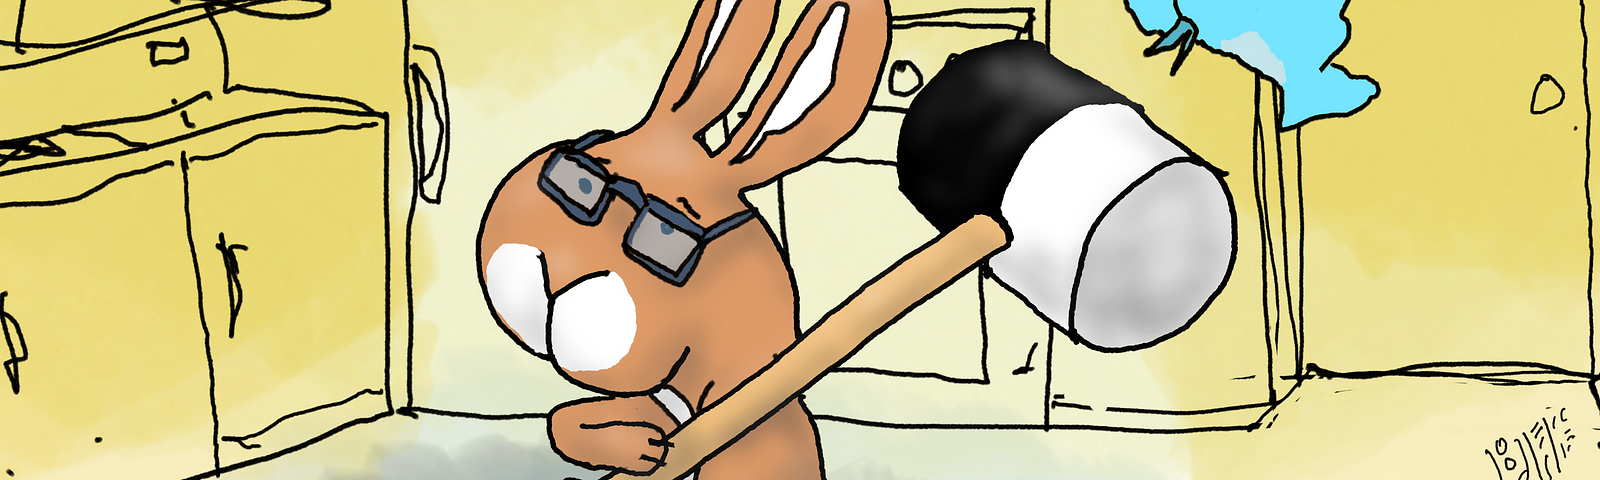 A cartoon of a brownish bunny with glasses holding a rubber mallet over his shoulder. The mallet has a wood handle and the barrel is half white, half black. The bunny is surrounded by three blue birds. They are all in a loosely. sketched yellow kitchen. Art by Doodleslice 2024